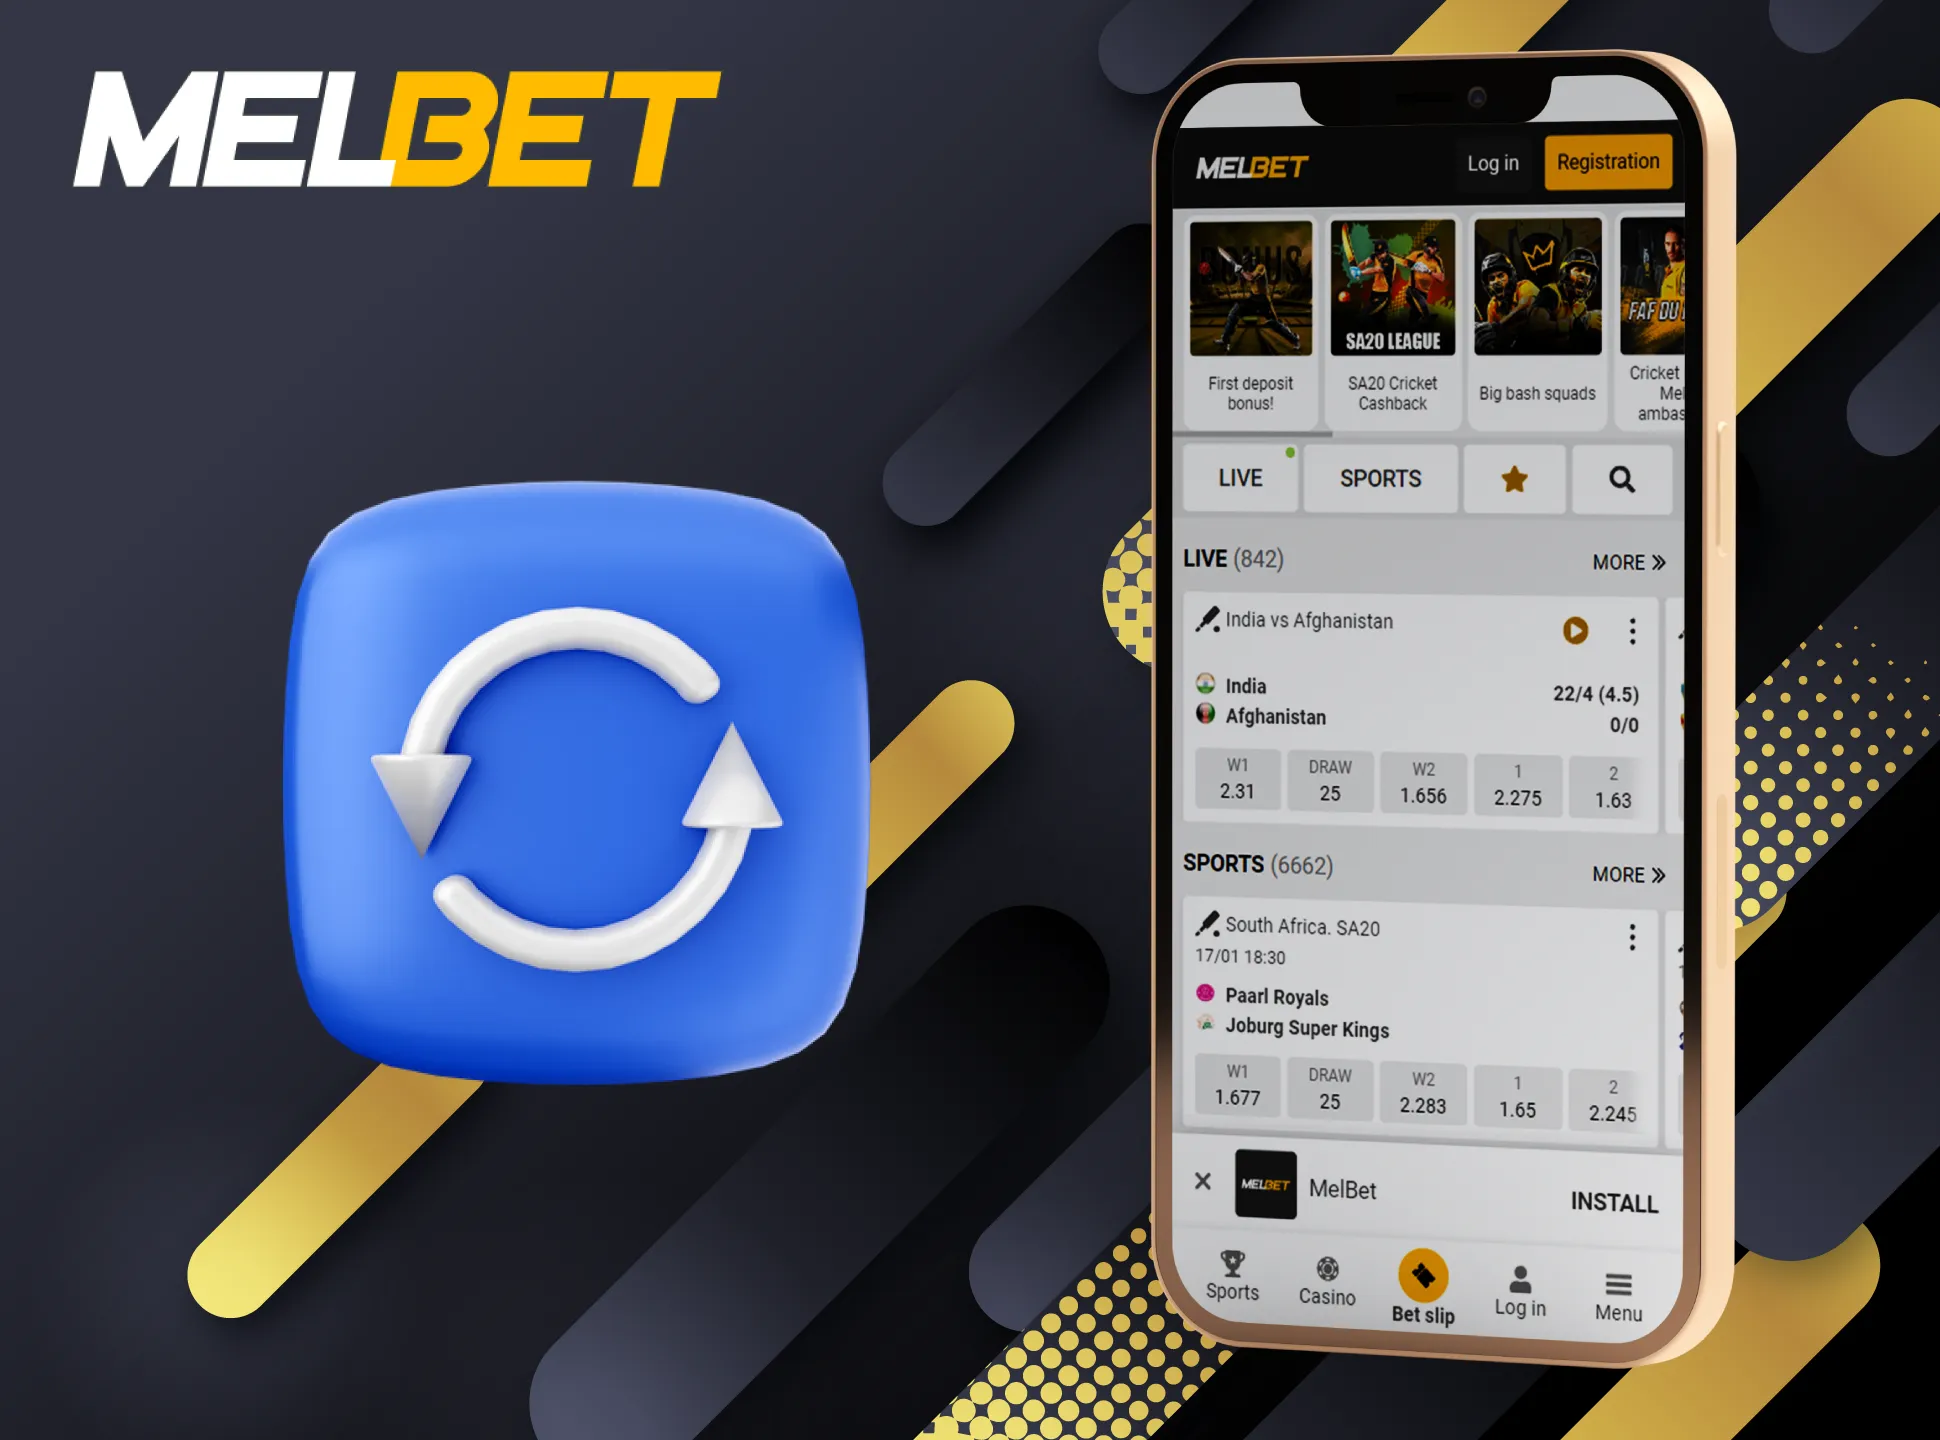 Your Melbet app gets updated automatically.